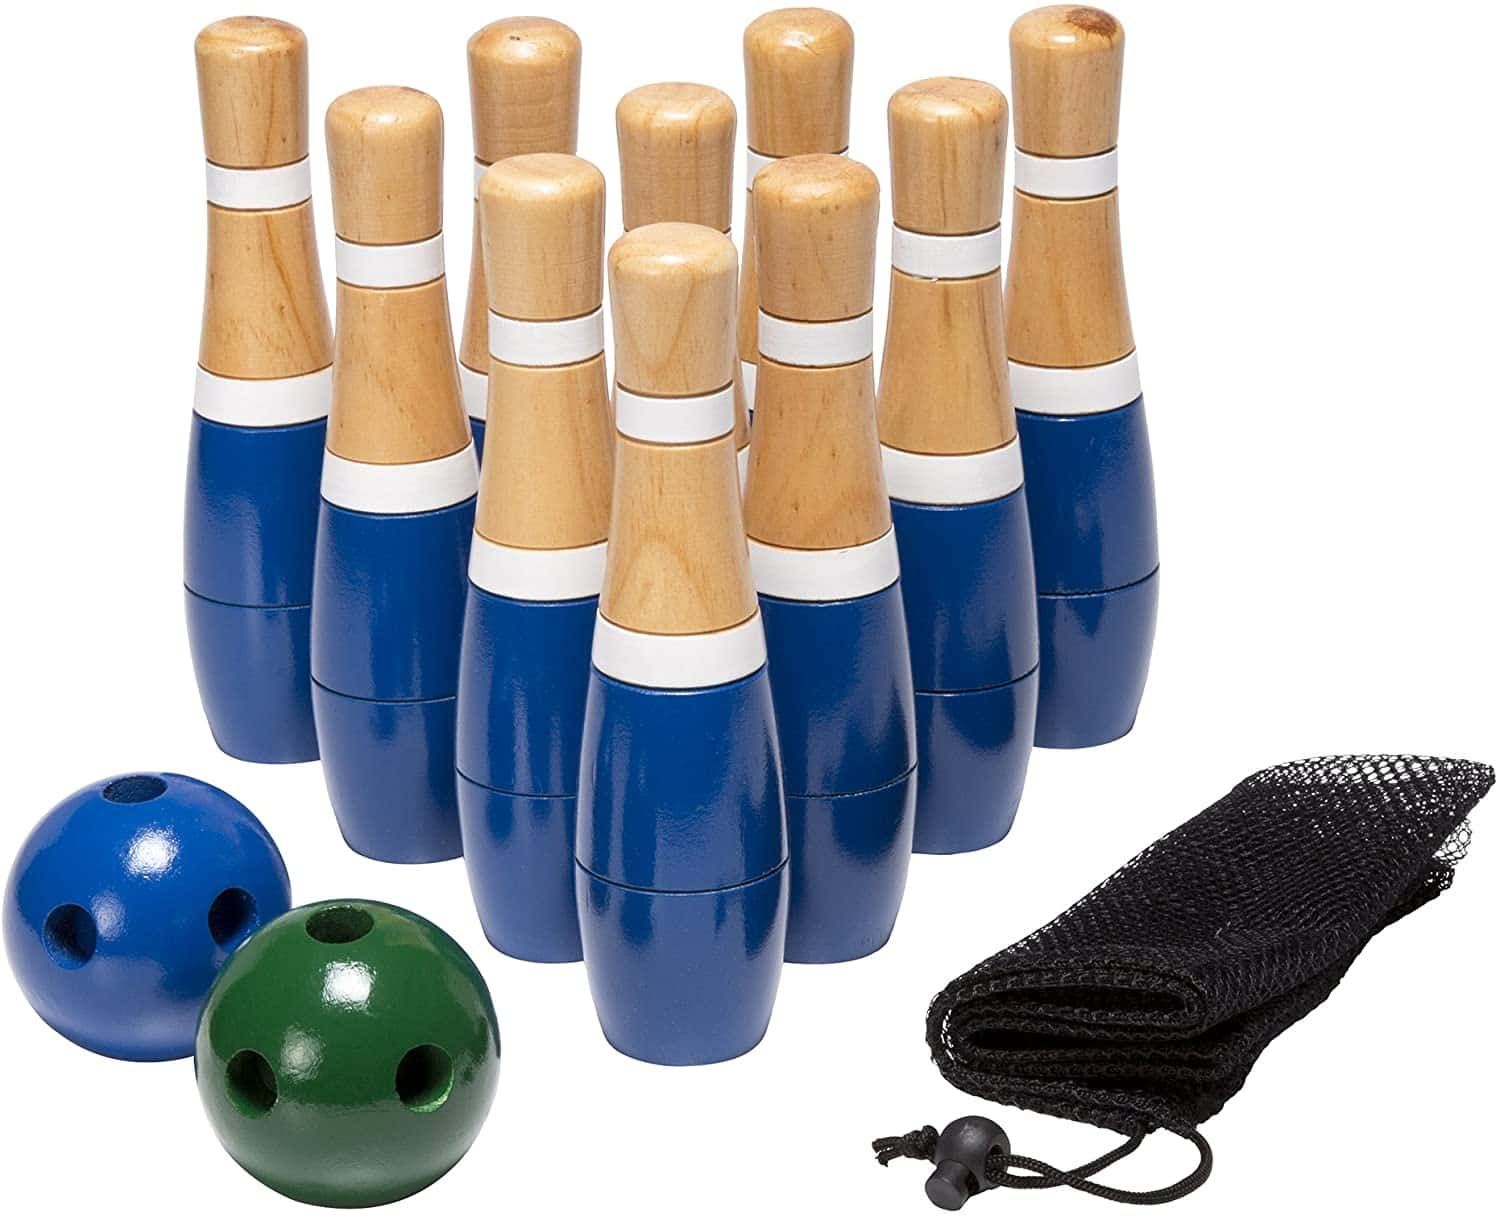 Lawn Bowling Game/Skittle Ball - $$title$$